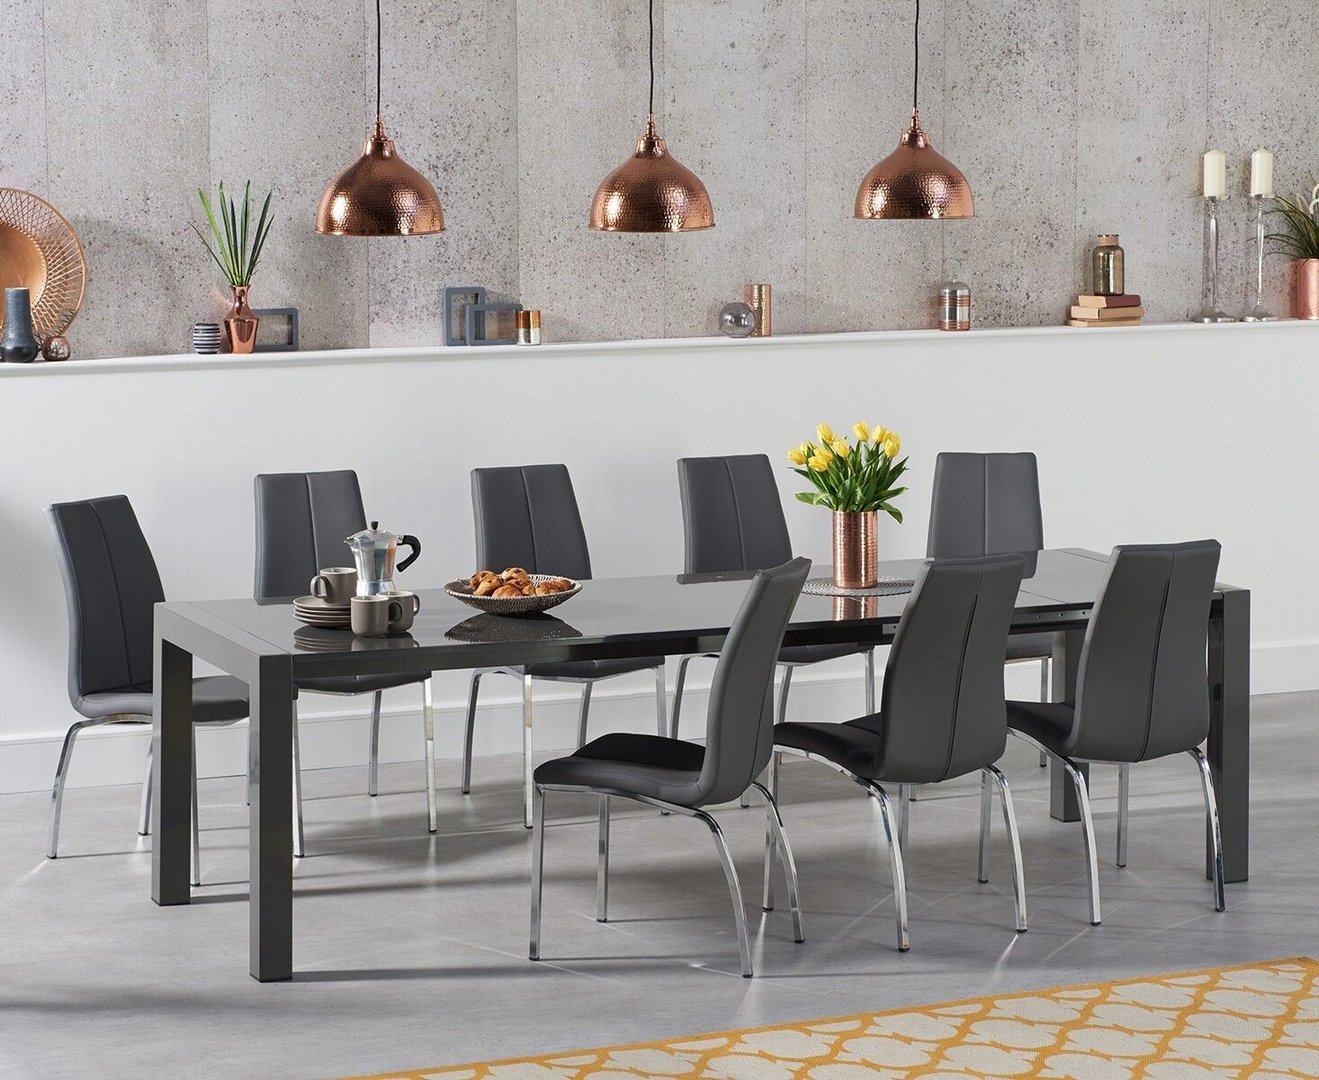 Large Dark Grey High Gloss Dining Table 10 Chairs Homegenies